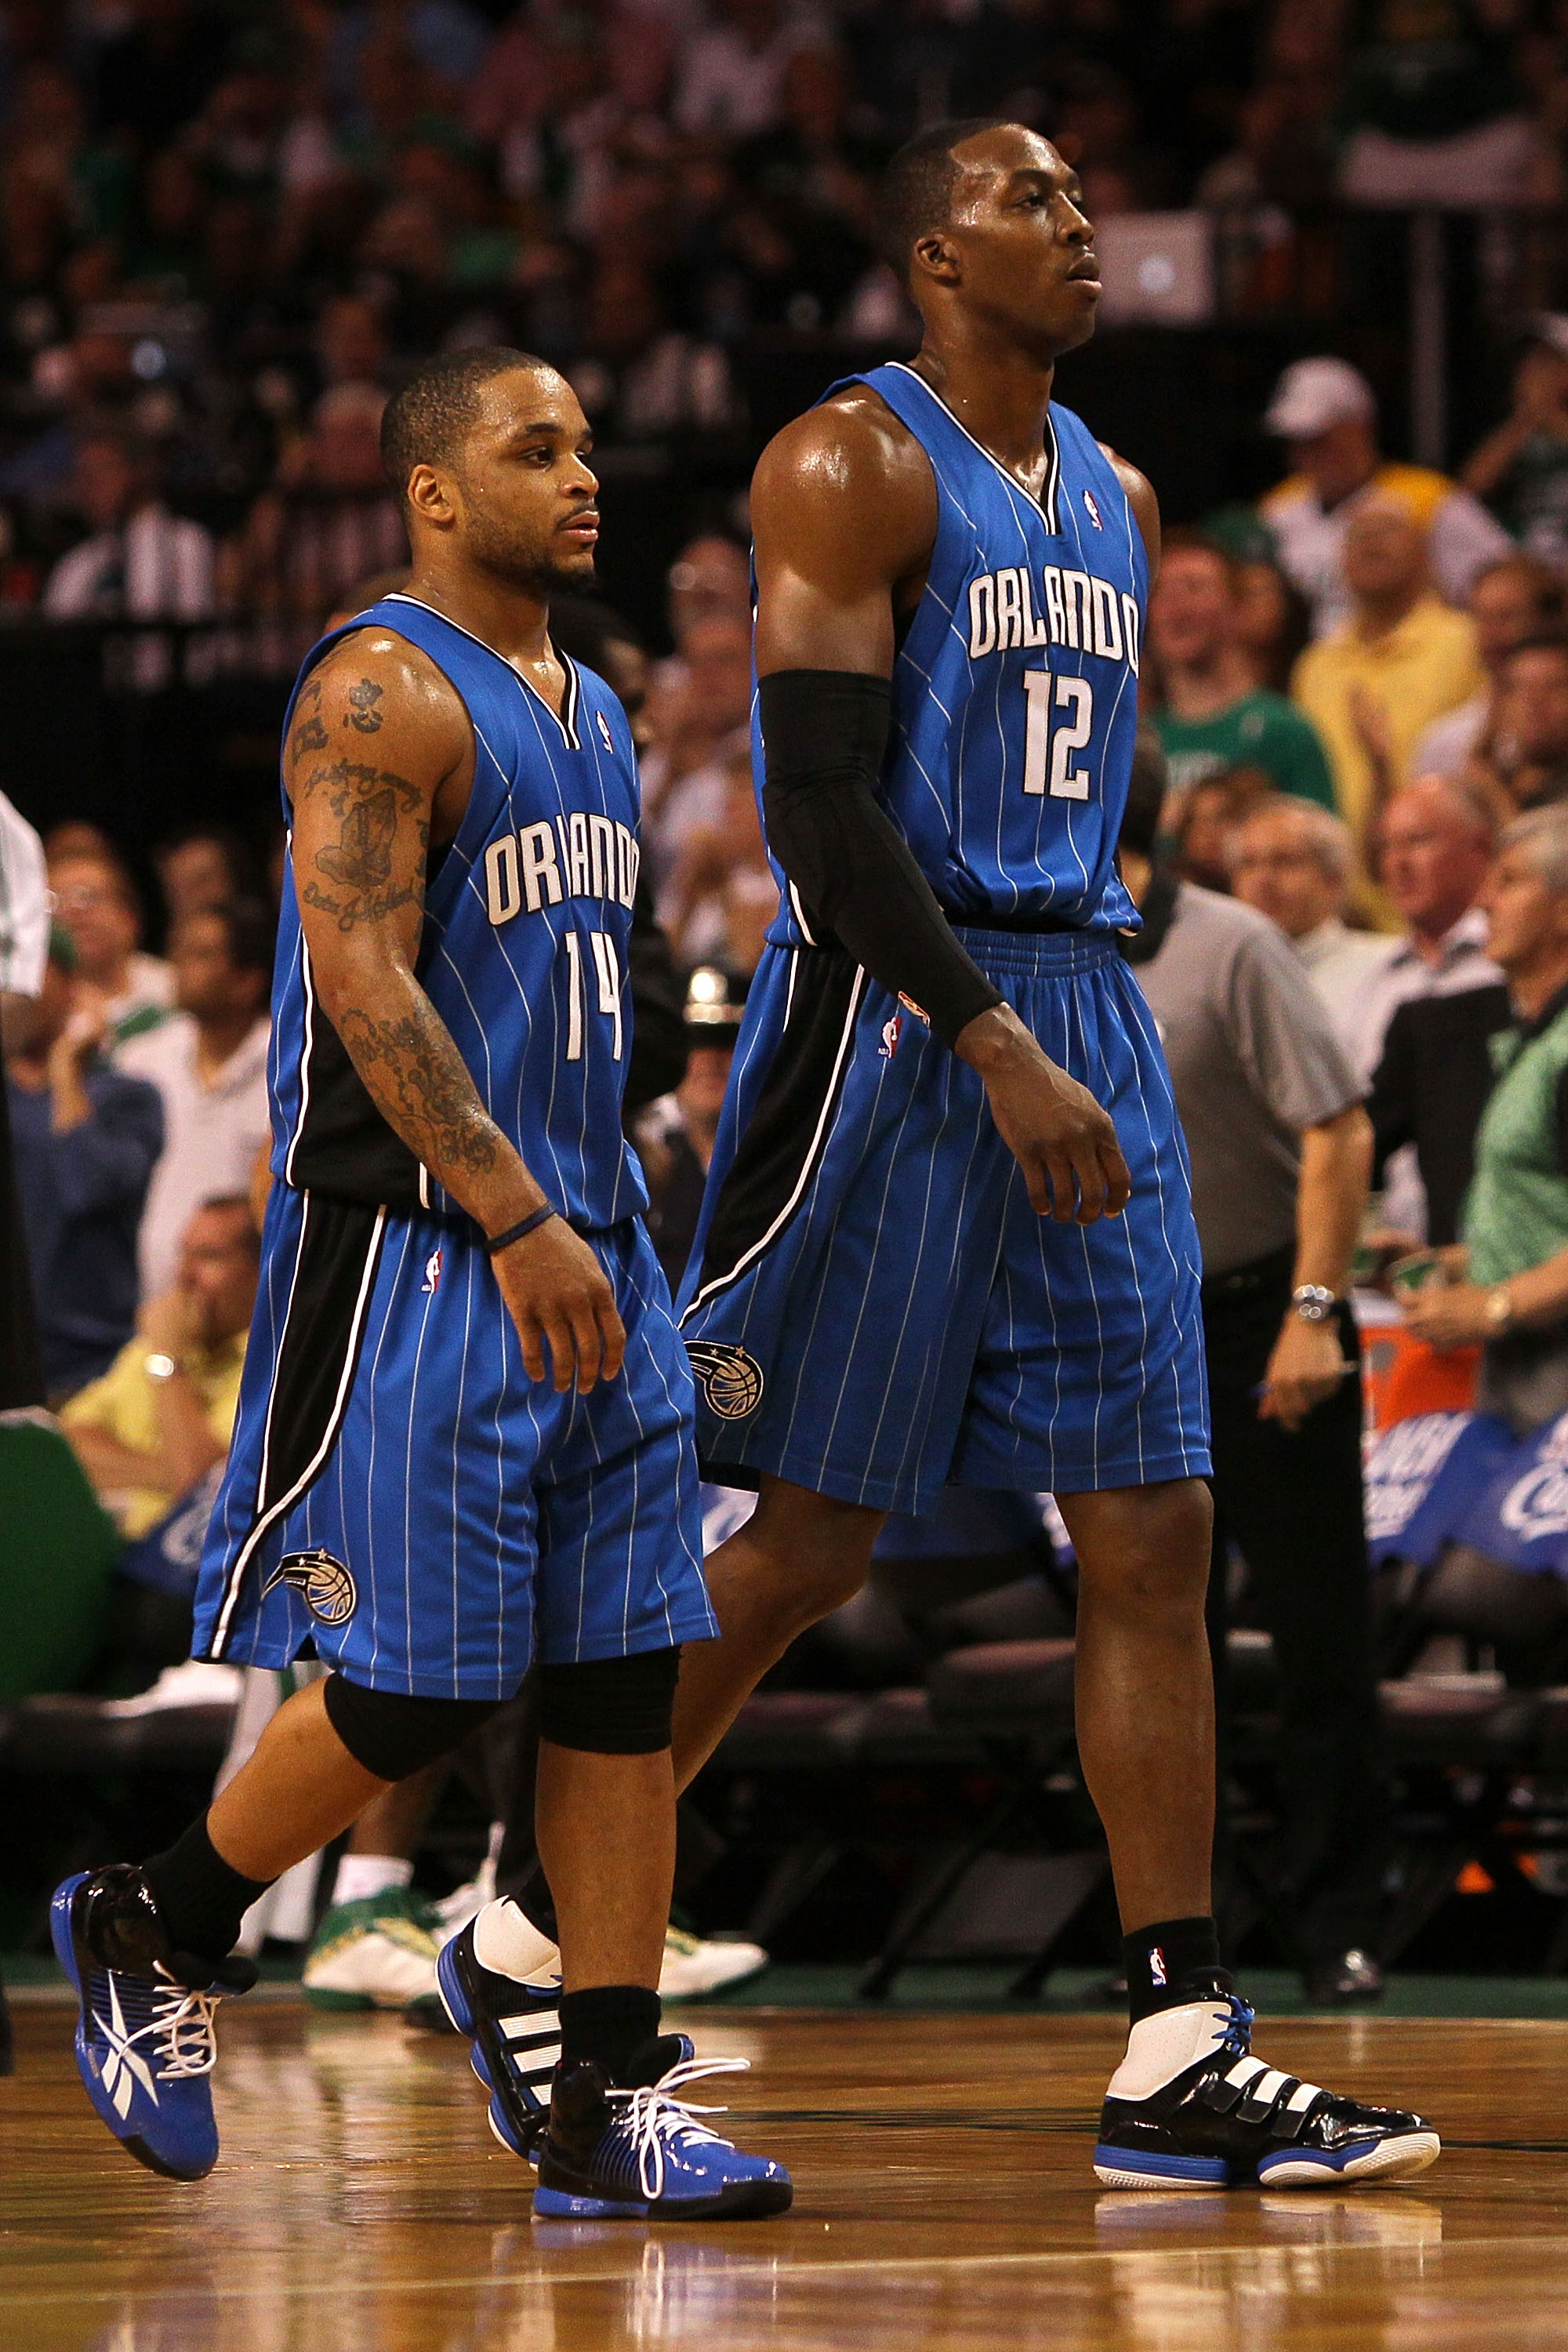 BOSTON - MAY 24:  (L-R) Jameer Nelson #14 and Dwight Howard #12 of the Orlando Magic walk towards the bench against the Boston Celtics in Game Four of the Eastern Conference Finals during the 2010 NBA Playoffs at TD Banknorth Garden on May 24, 2010 in Bos